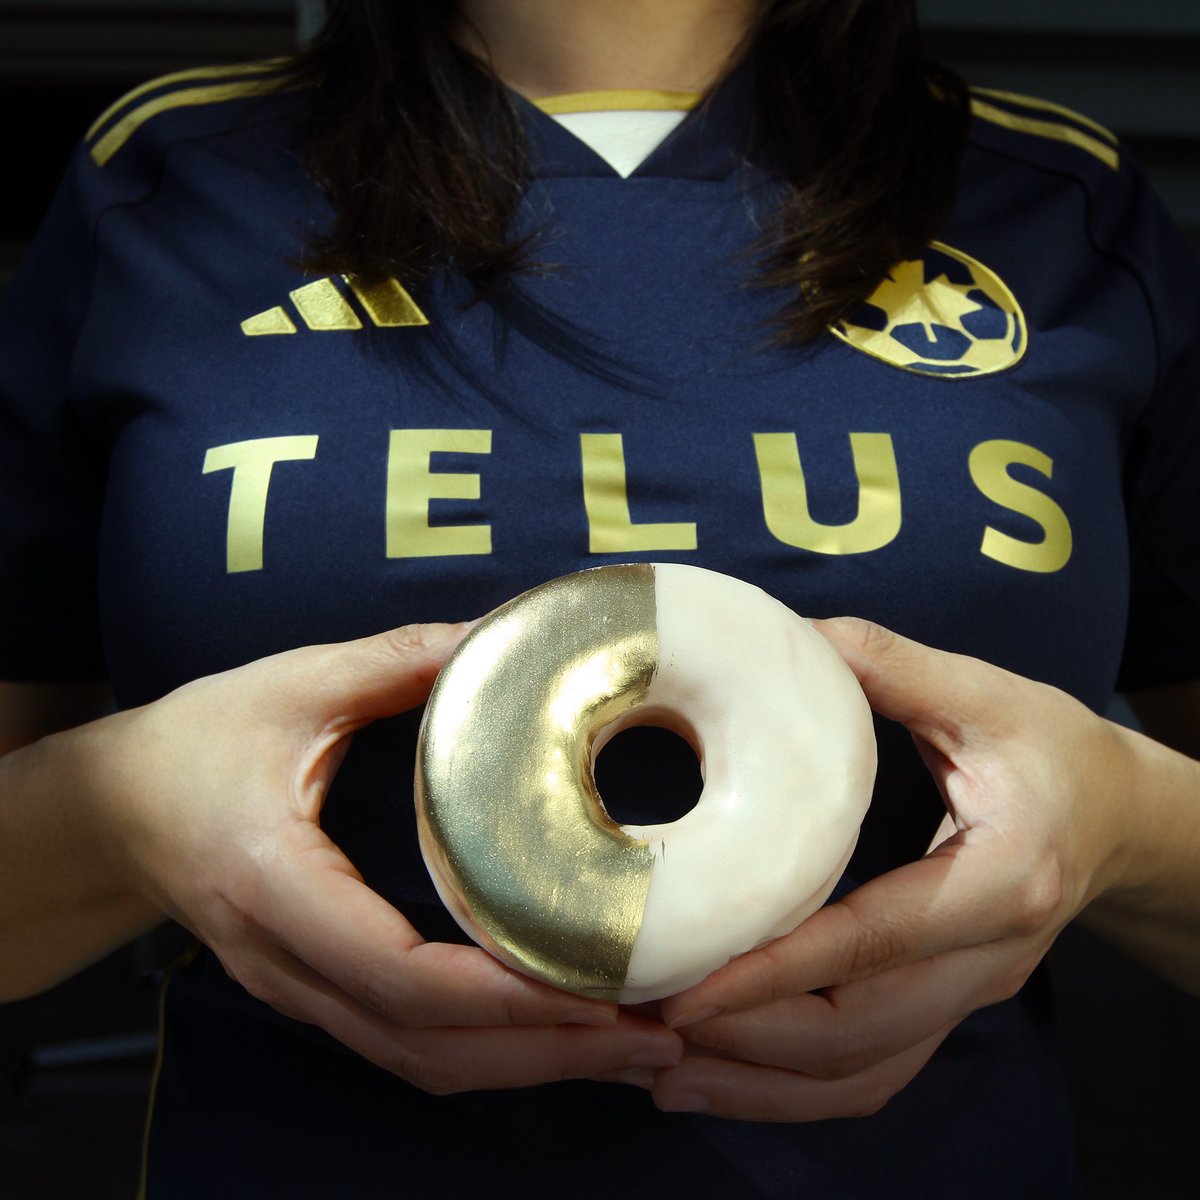 The @WhitecapsFC's 50th anniversary celebration match at @bcplace marked the highest match attendance for their MLS era with 32,465 fans! And, our team offered special gold donuts and burgers, plus a gold-flecked cocktail in the premium spaces! ✨⚽️ #BCPlace #MLS #Vancouver